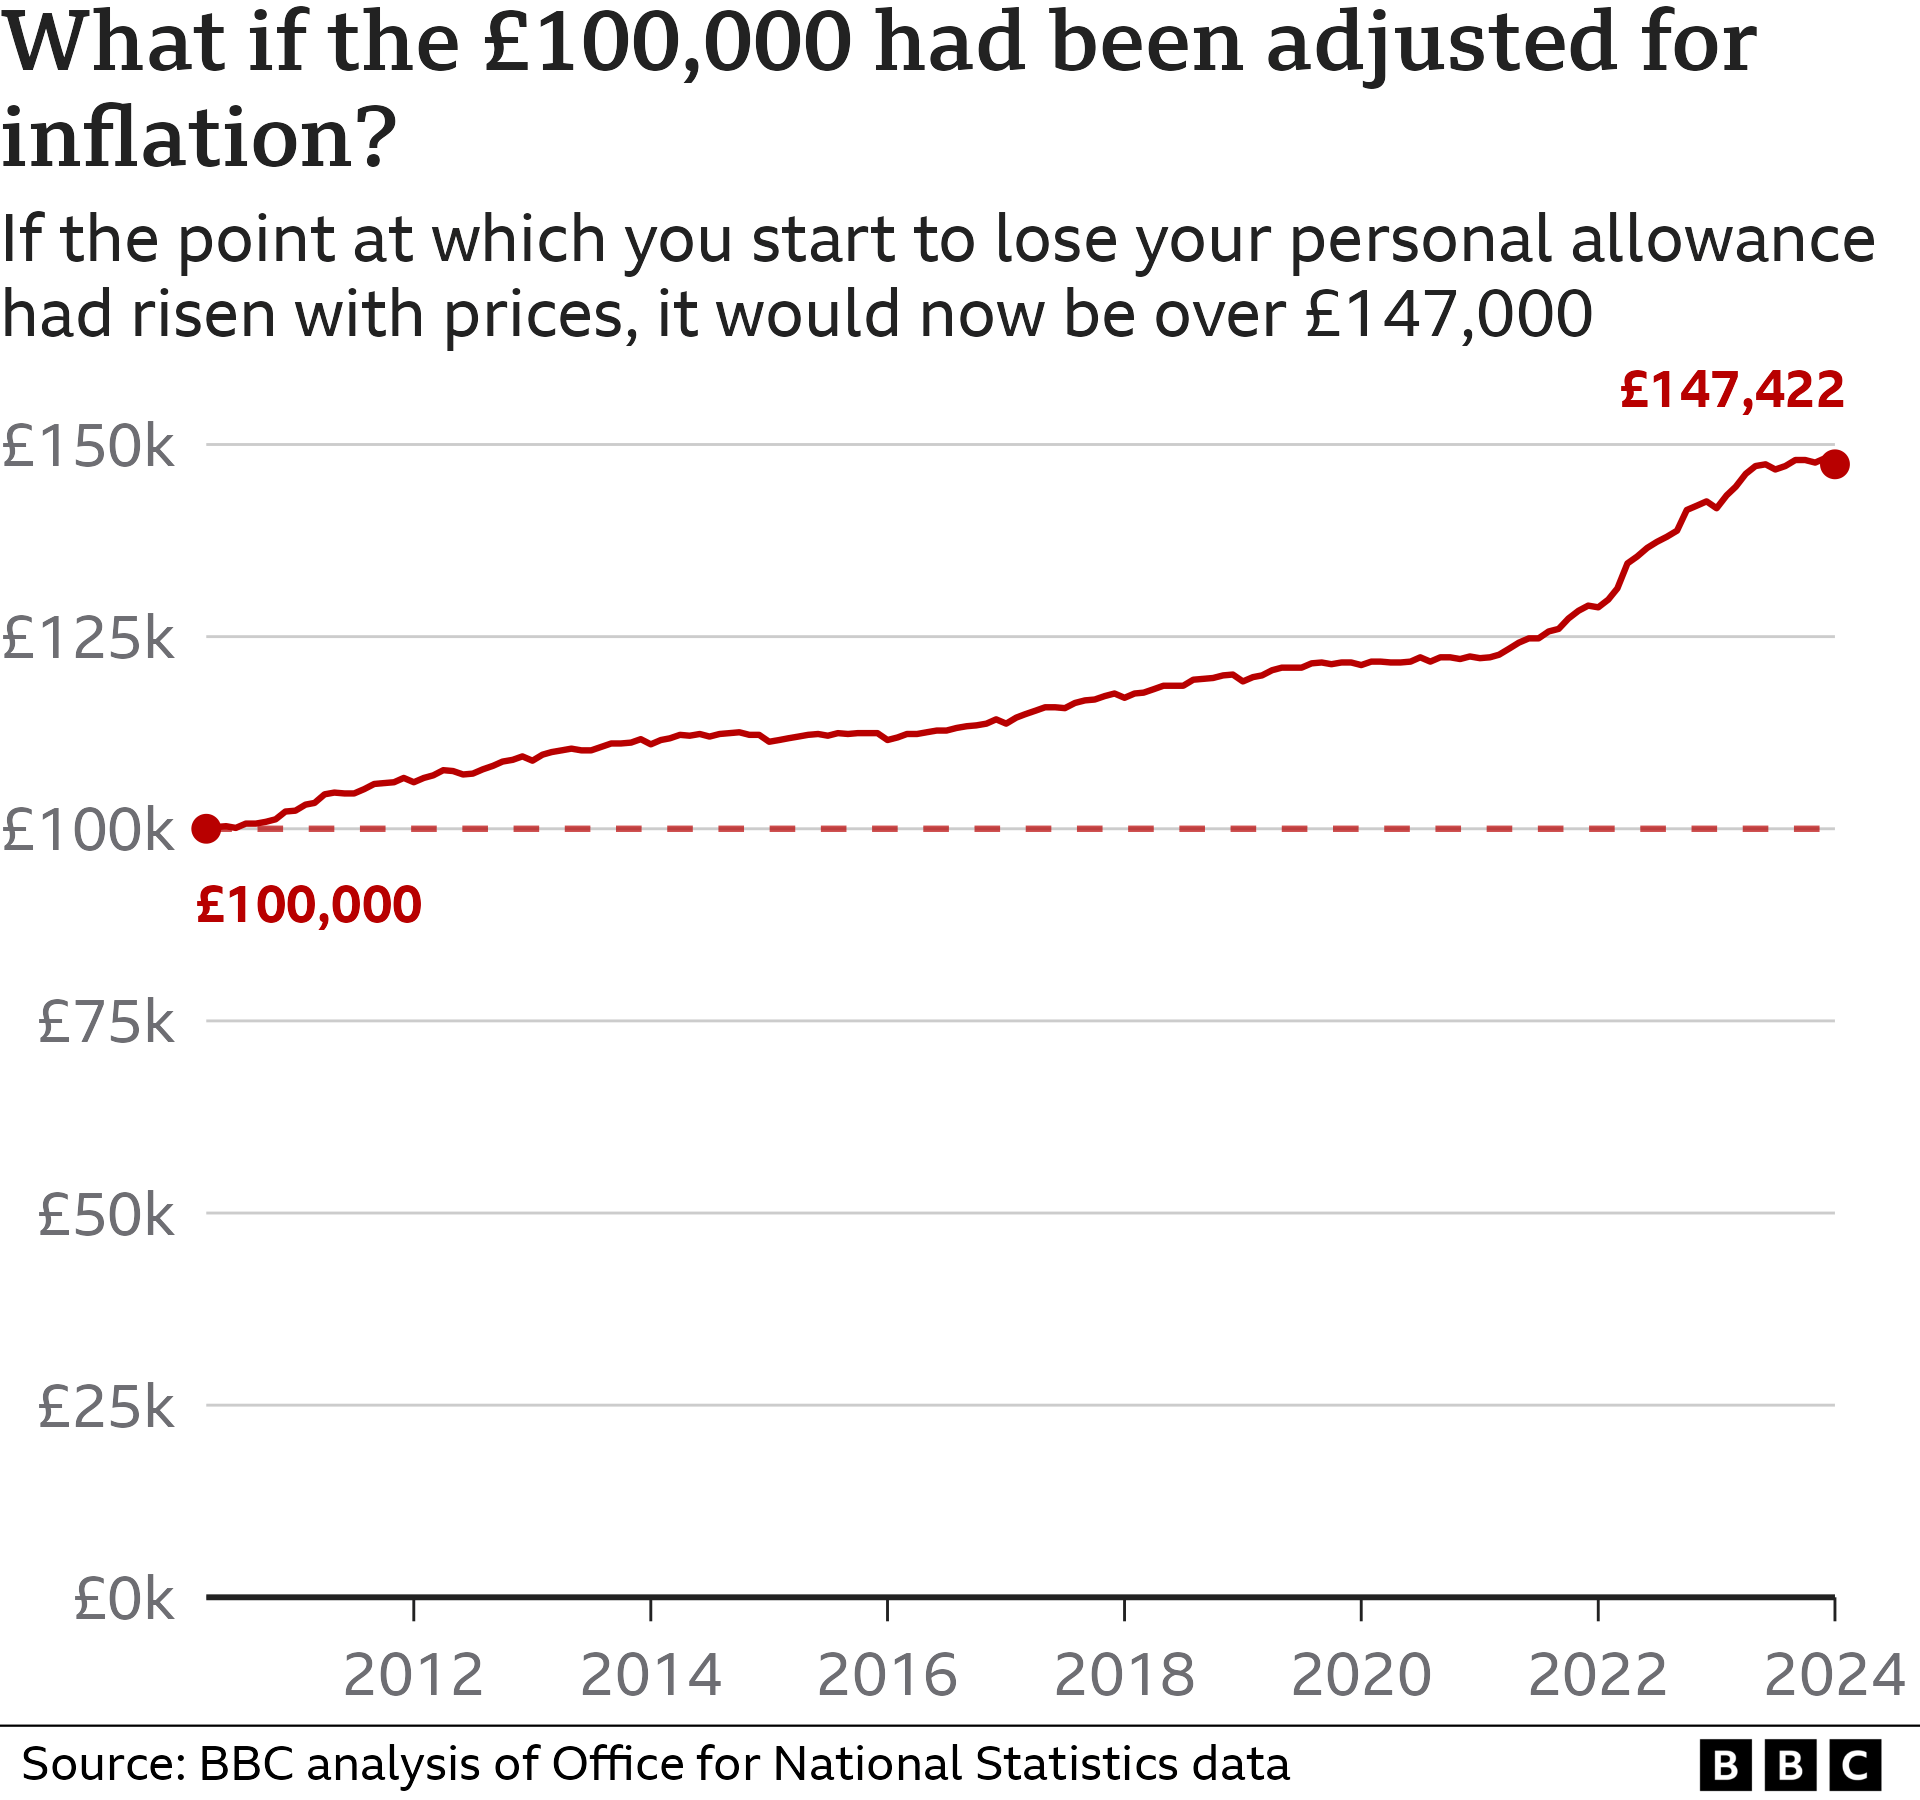 A line chart shows how £100,000 in 2010 would be worth £147,422 today but the £100,000 threshold for losing the personal tax allowance has not changed